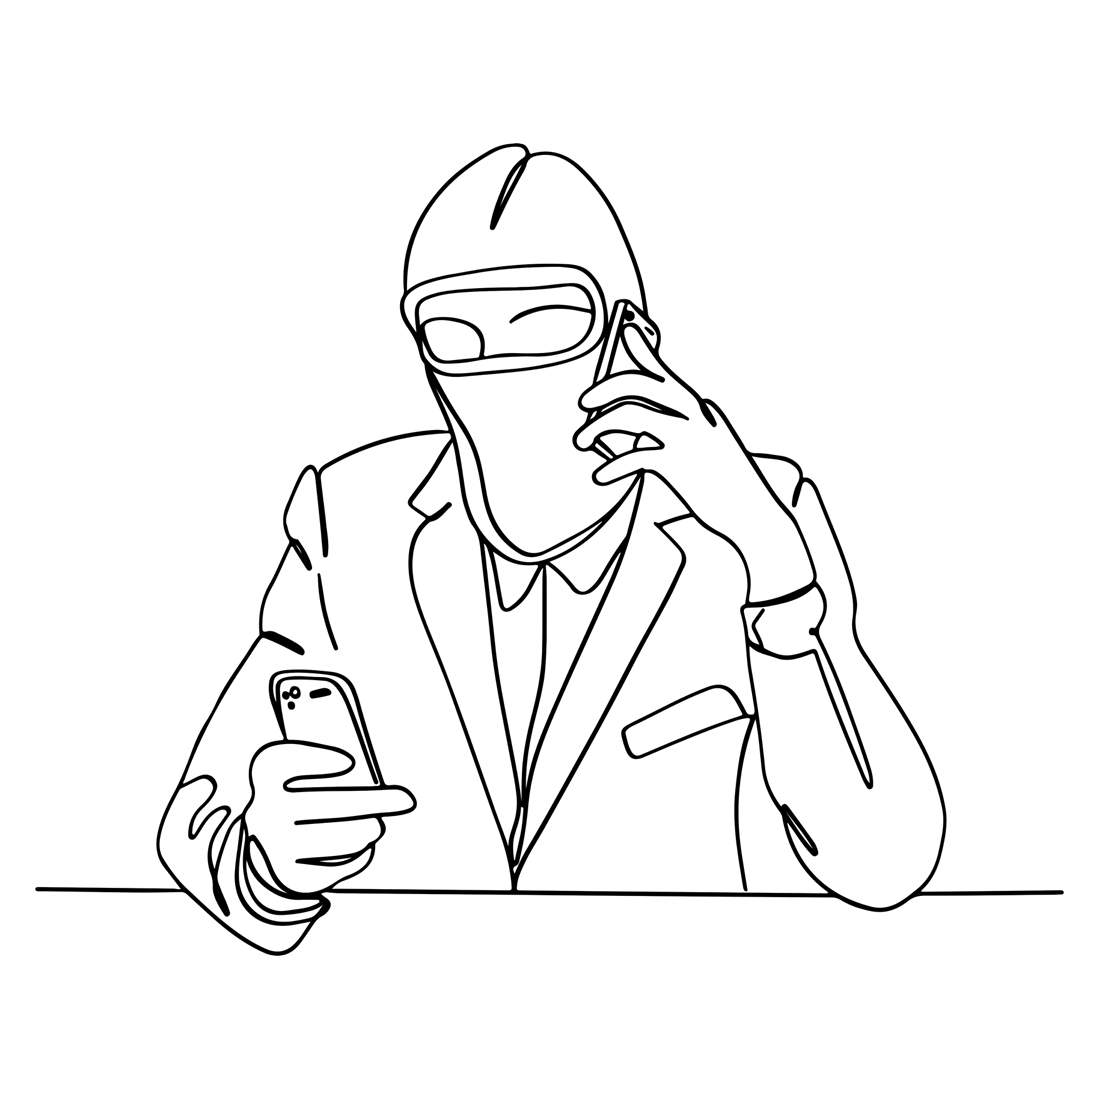 Phone Scam Saga: Cartoon Drawing of Masked Hacker in Continuous Line, Online Threat Vector: Continuous Line Drawing of Cyber Scammer with Mask preview image.